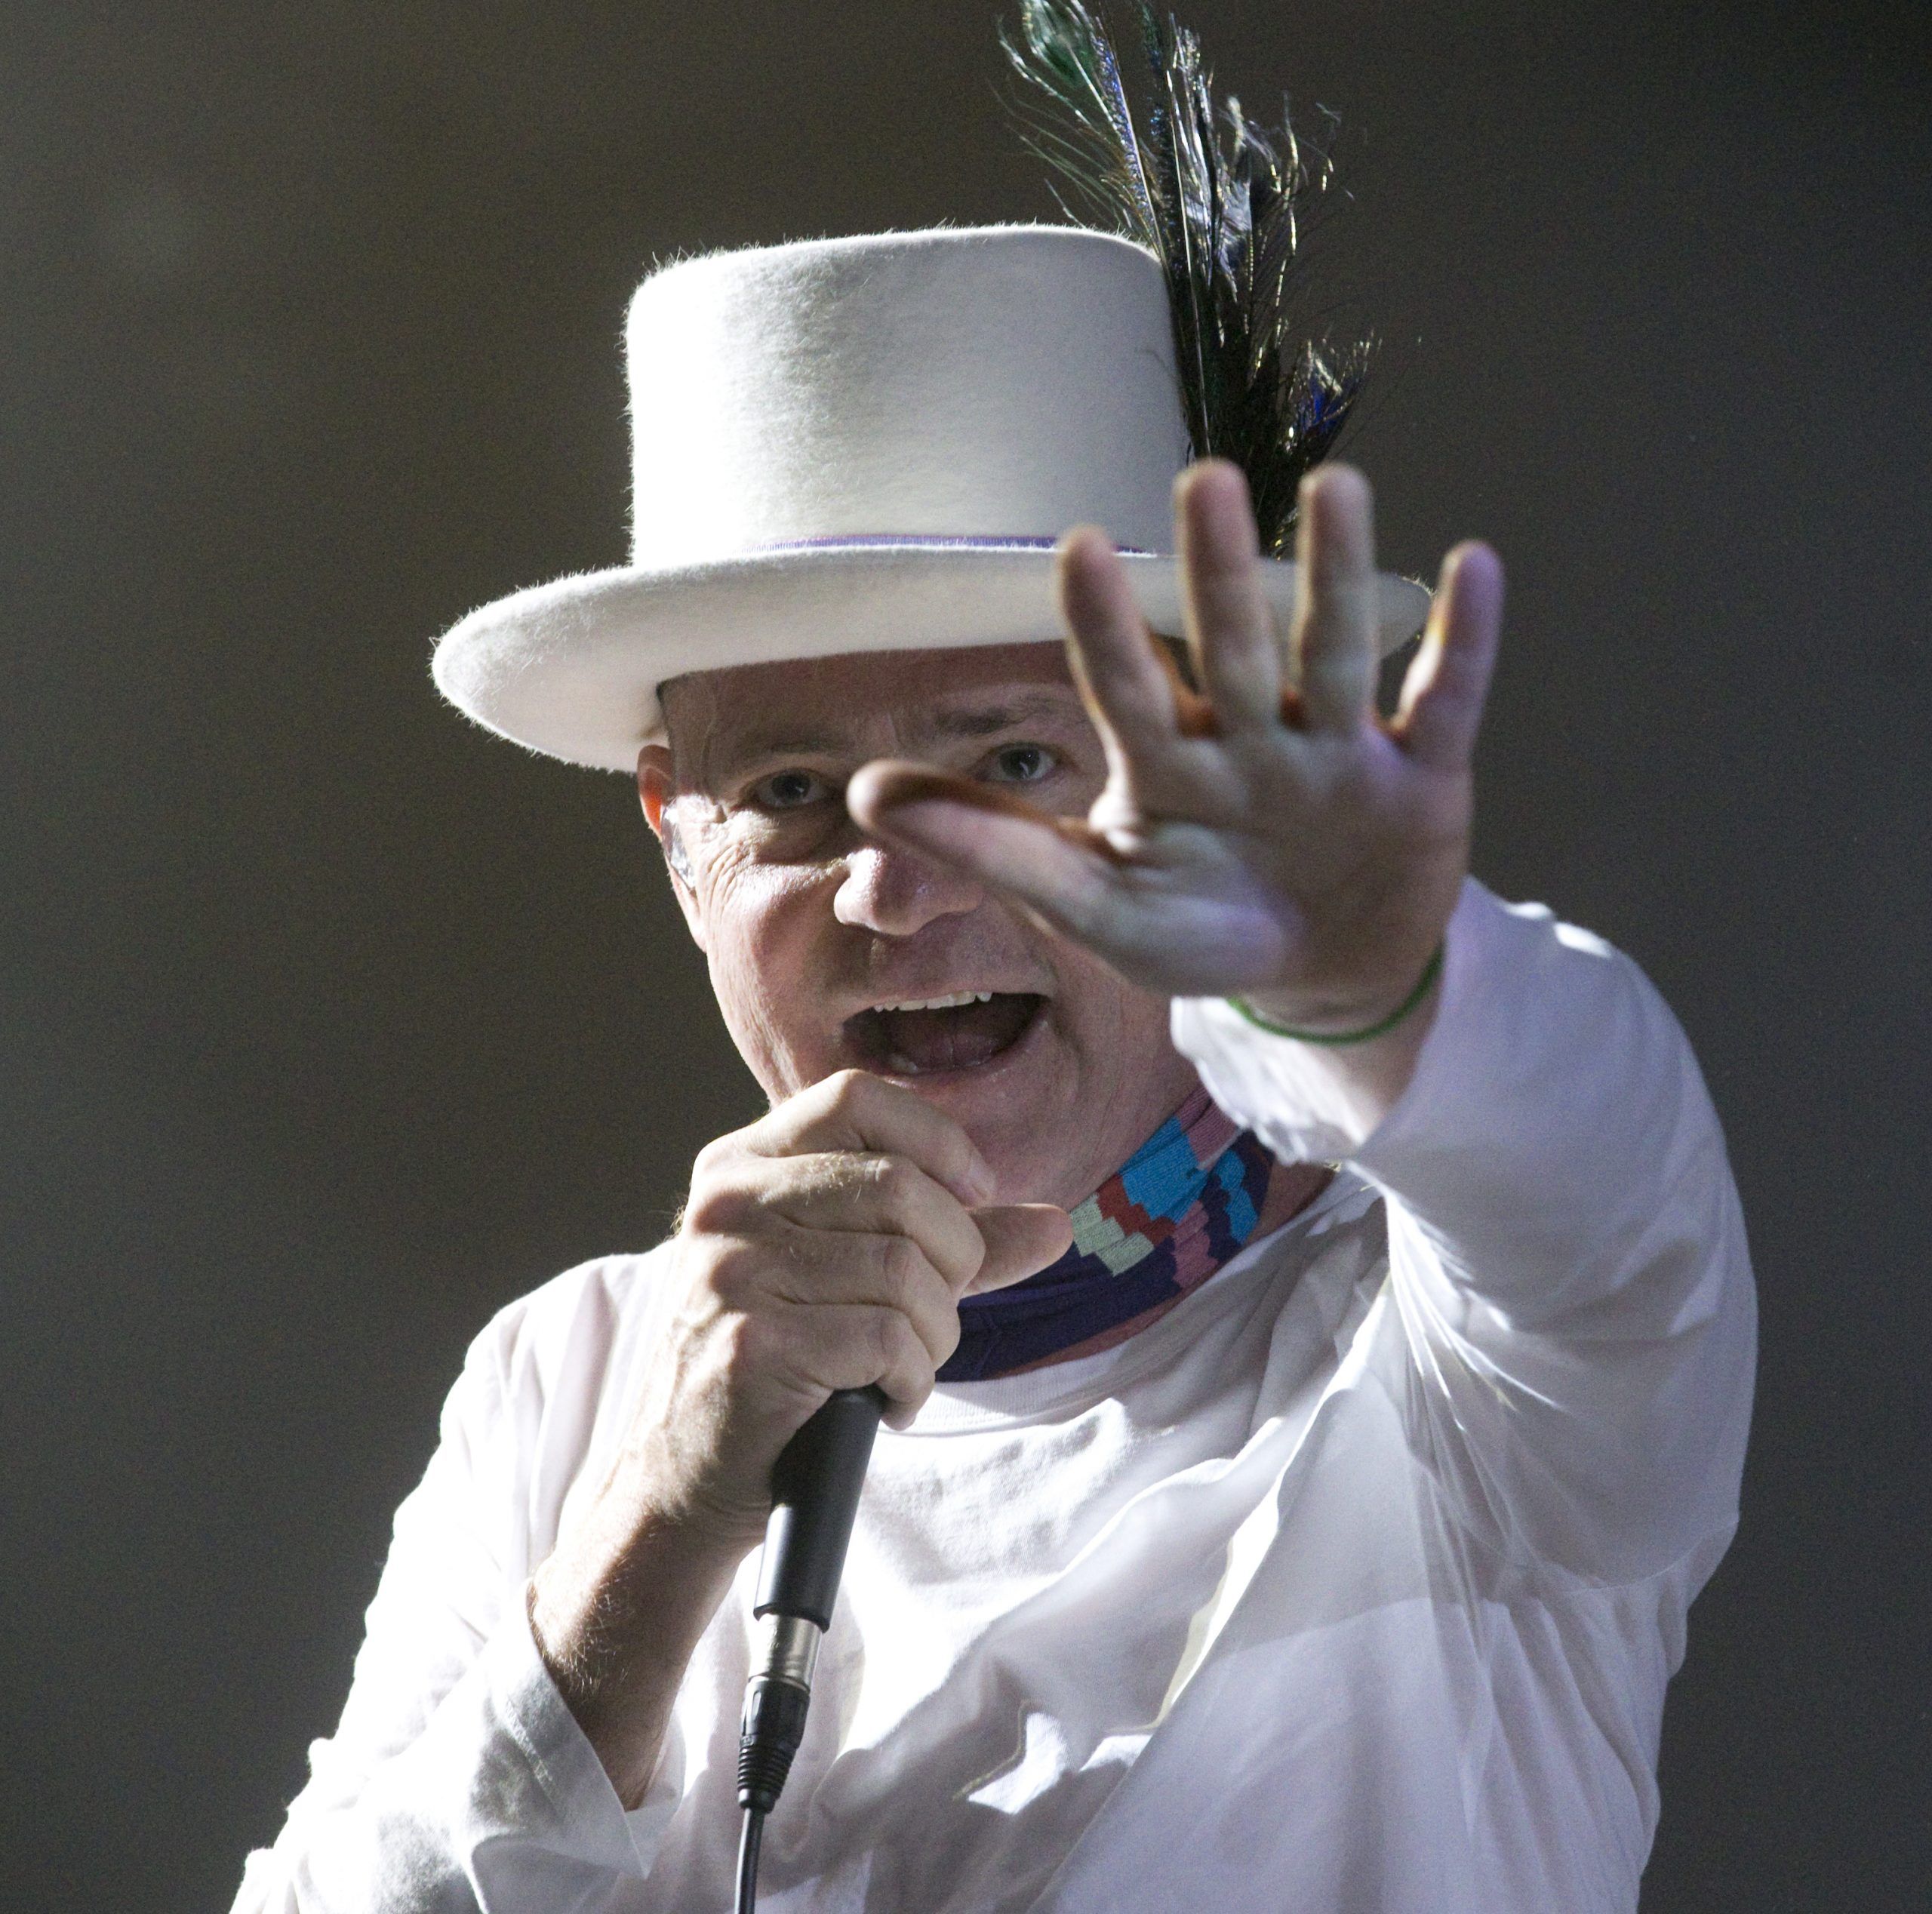 The Tragically Hip singer Gord Downie performs at Budweiser Gardens in London, Ont. on Monday August 8, 2016. 